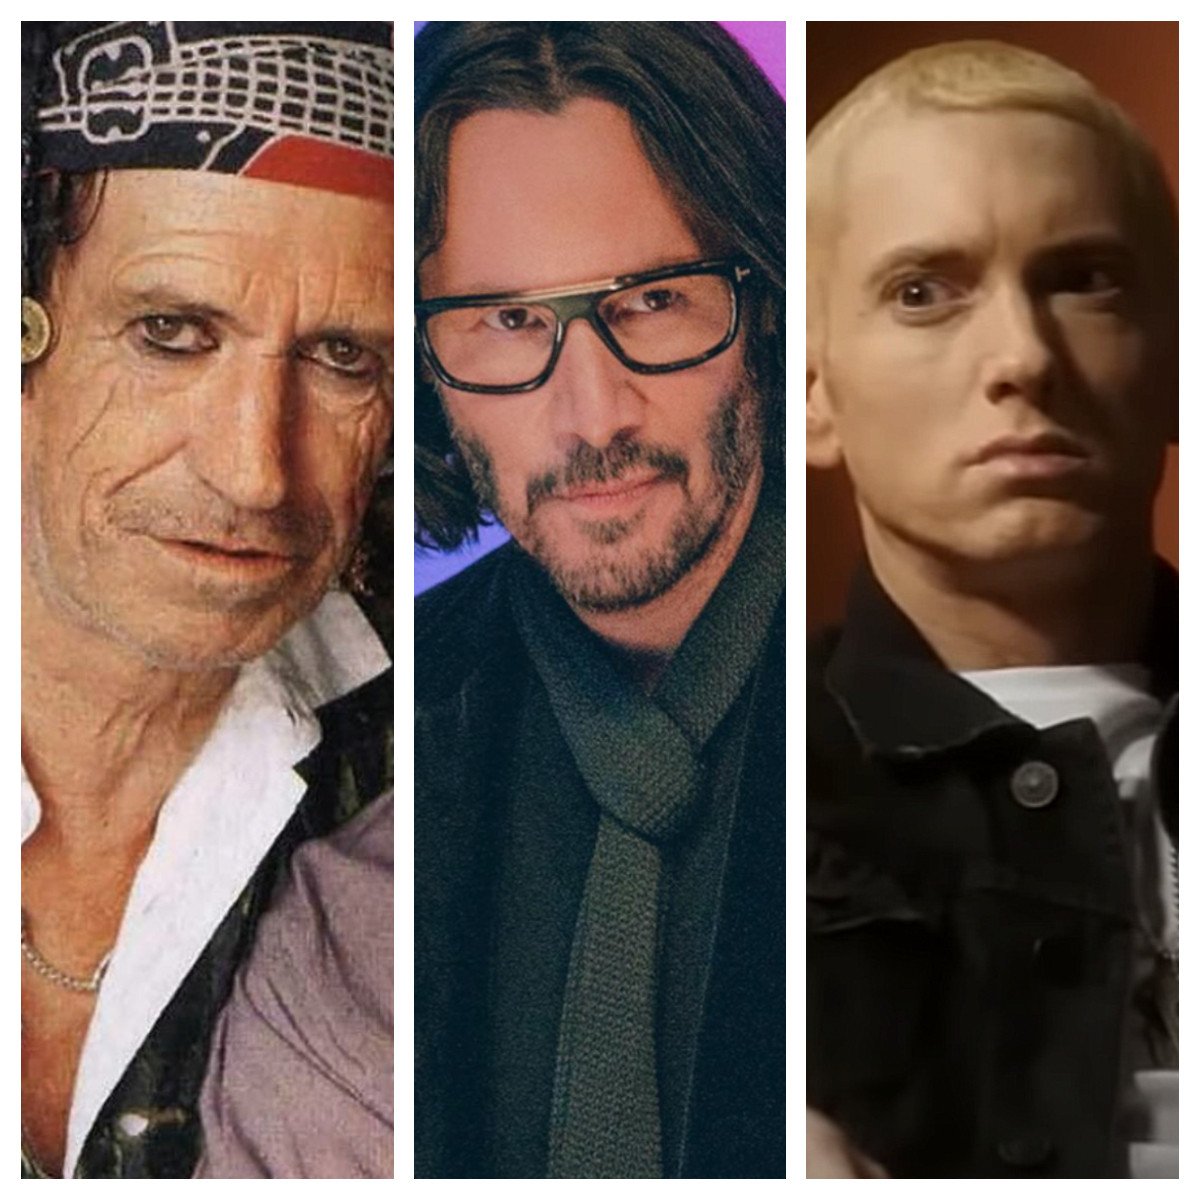 Keith Richards, Keanu Reeves and Eminem have all had surprising cameos in Hollywood films. Photos: @johnnys_army_of_love, @lesleychianglove/Instagram; Movie Lines/YouTube
